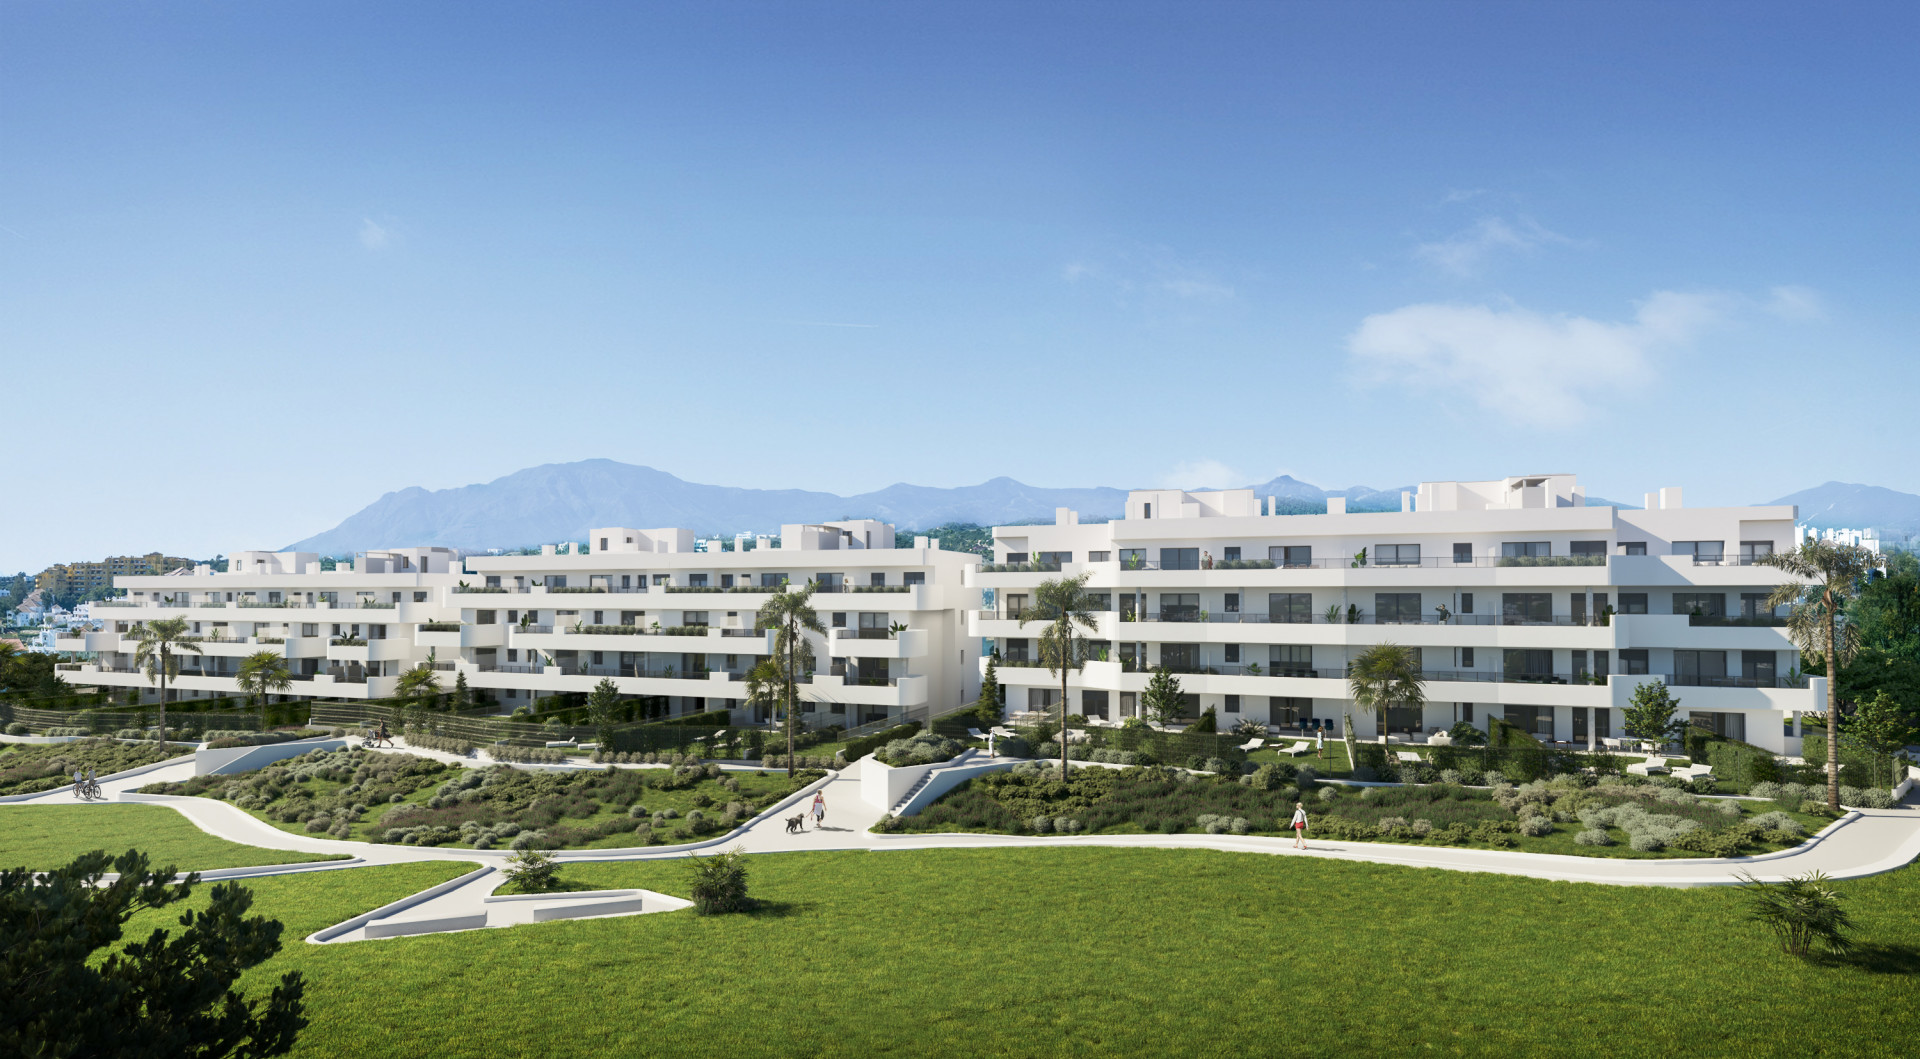 Aranya Estepona: New residential complex consisting of flats and penthouses located in Estepona.